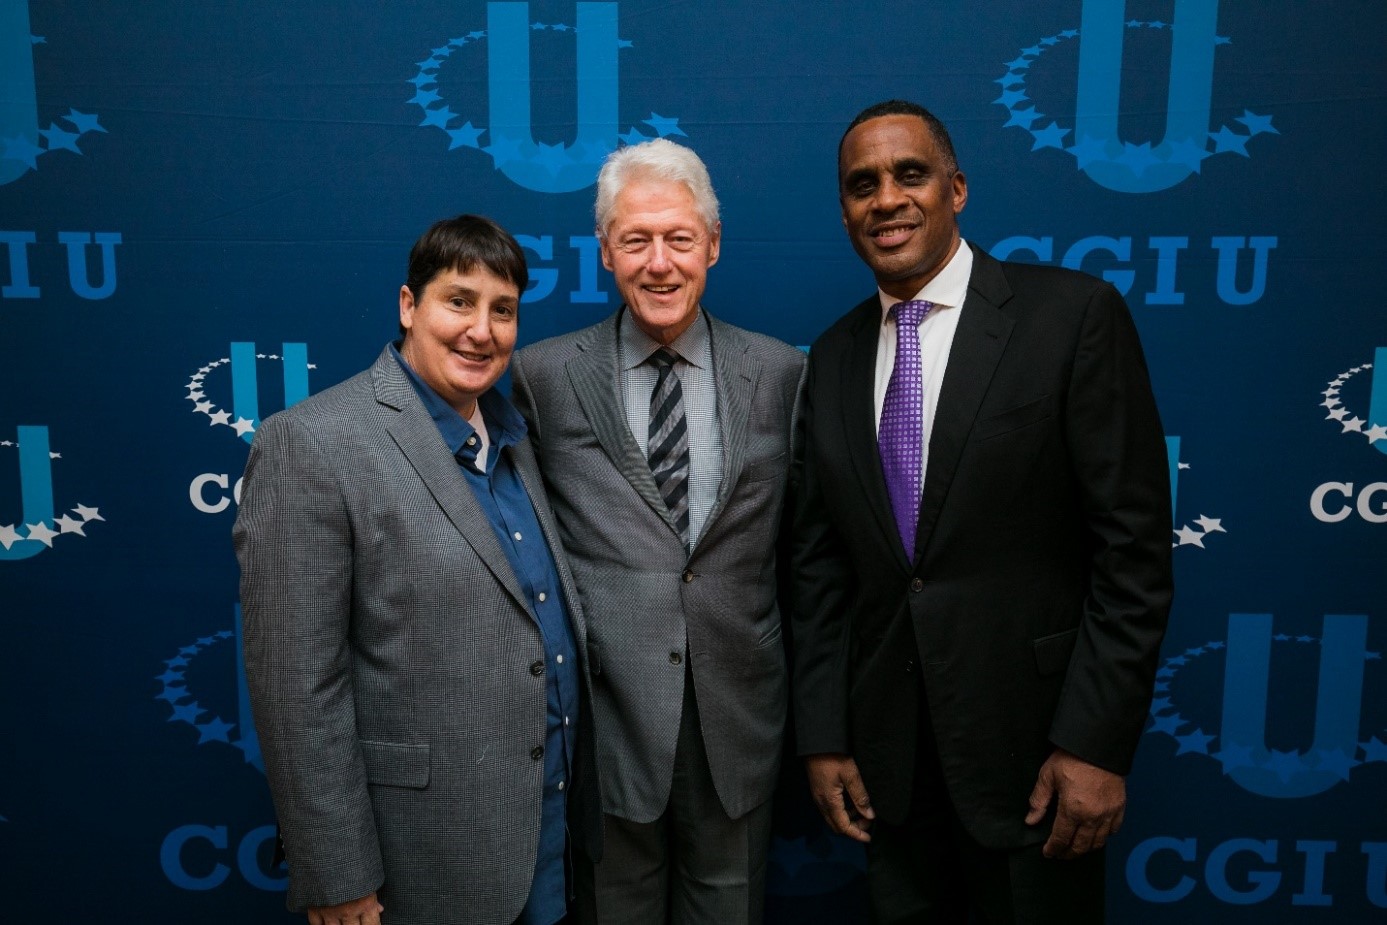 Professor Mary-Pat Stein with President Bill Clinton and another CGI-U guest standing in front of the CGI-U sign.